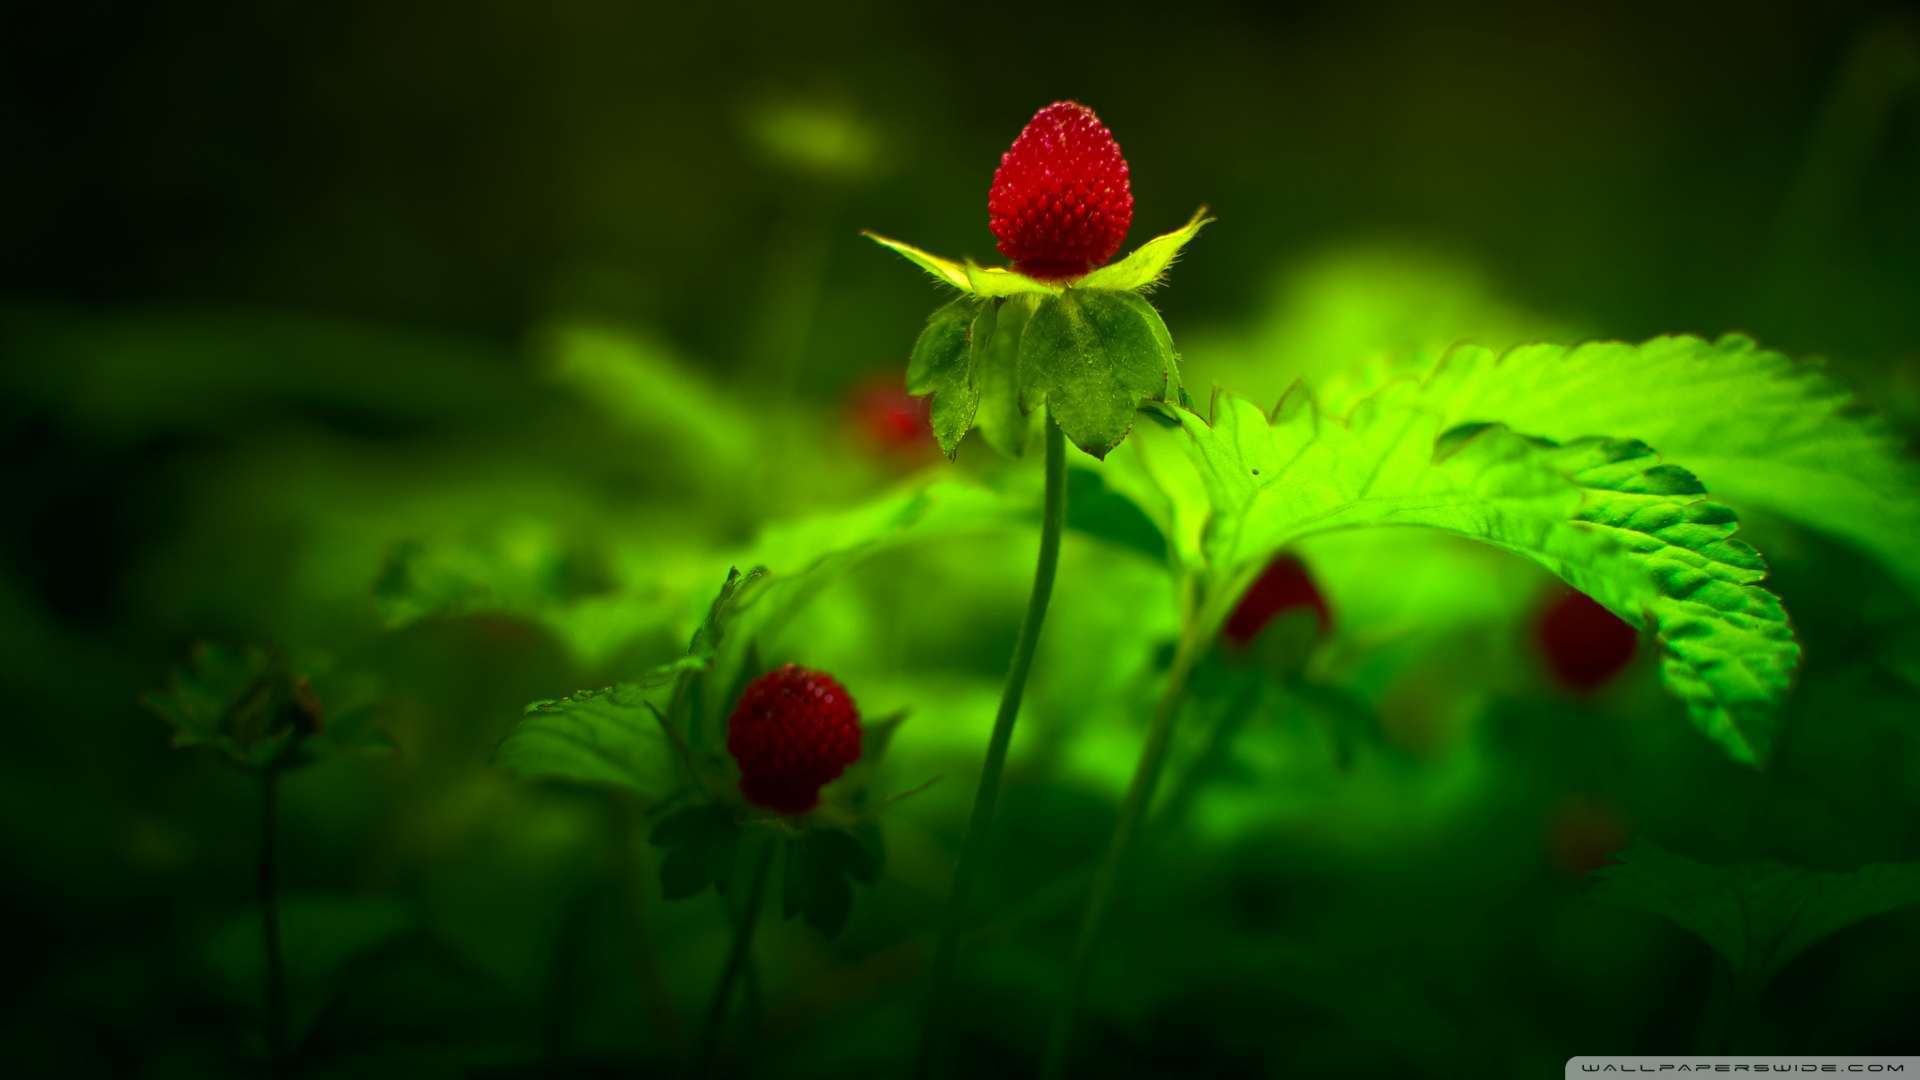 red wallpaper hd download,green,nature,red,flower,plant